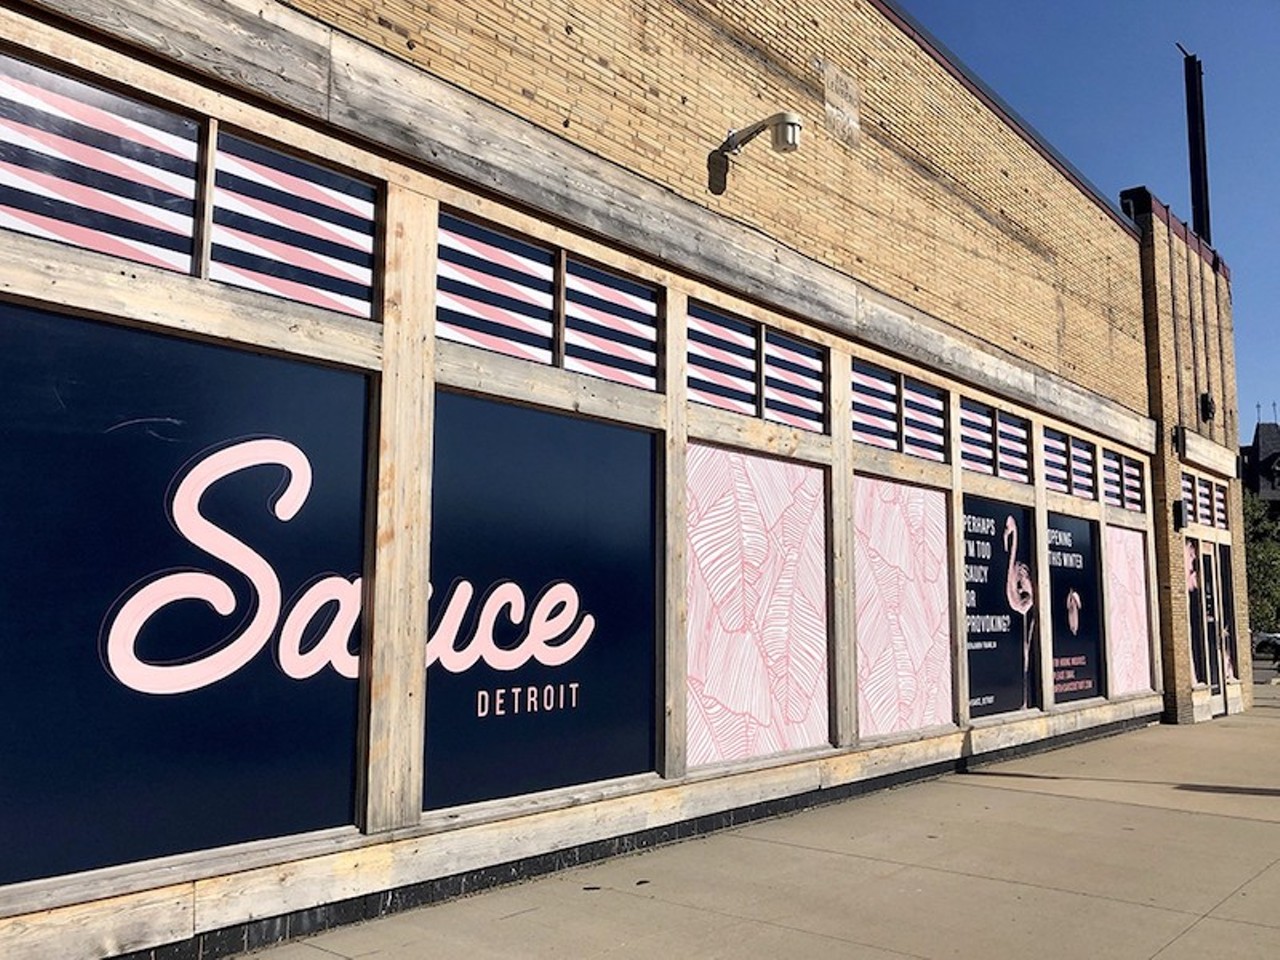 Sauce
4120 Second Ave., Detroit
Technically Sauce never opened to ever have closed, but it’s on the list because it simply didn’t happen. Fortunately the restaurant group behind Sauce decided to open a new restaurant in the space with a similar concept.